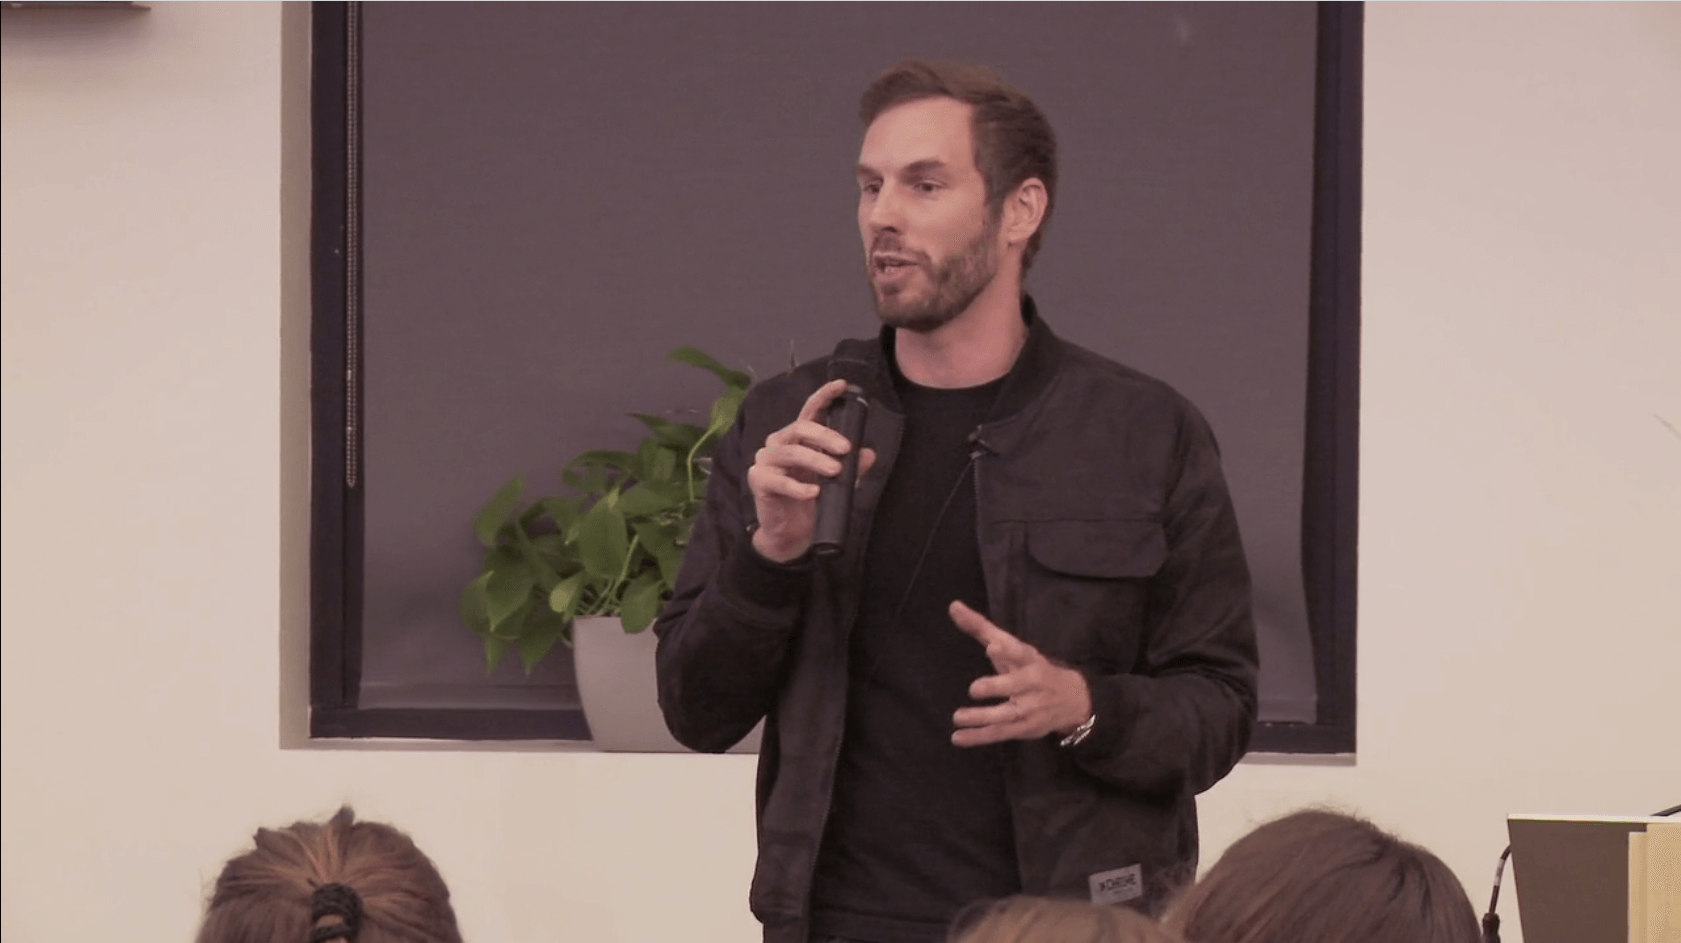 Charlie Sutton talks about designing for VR at ProductTank San Francisco